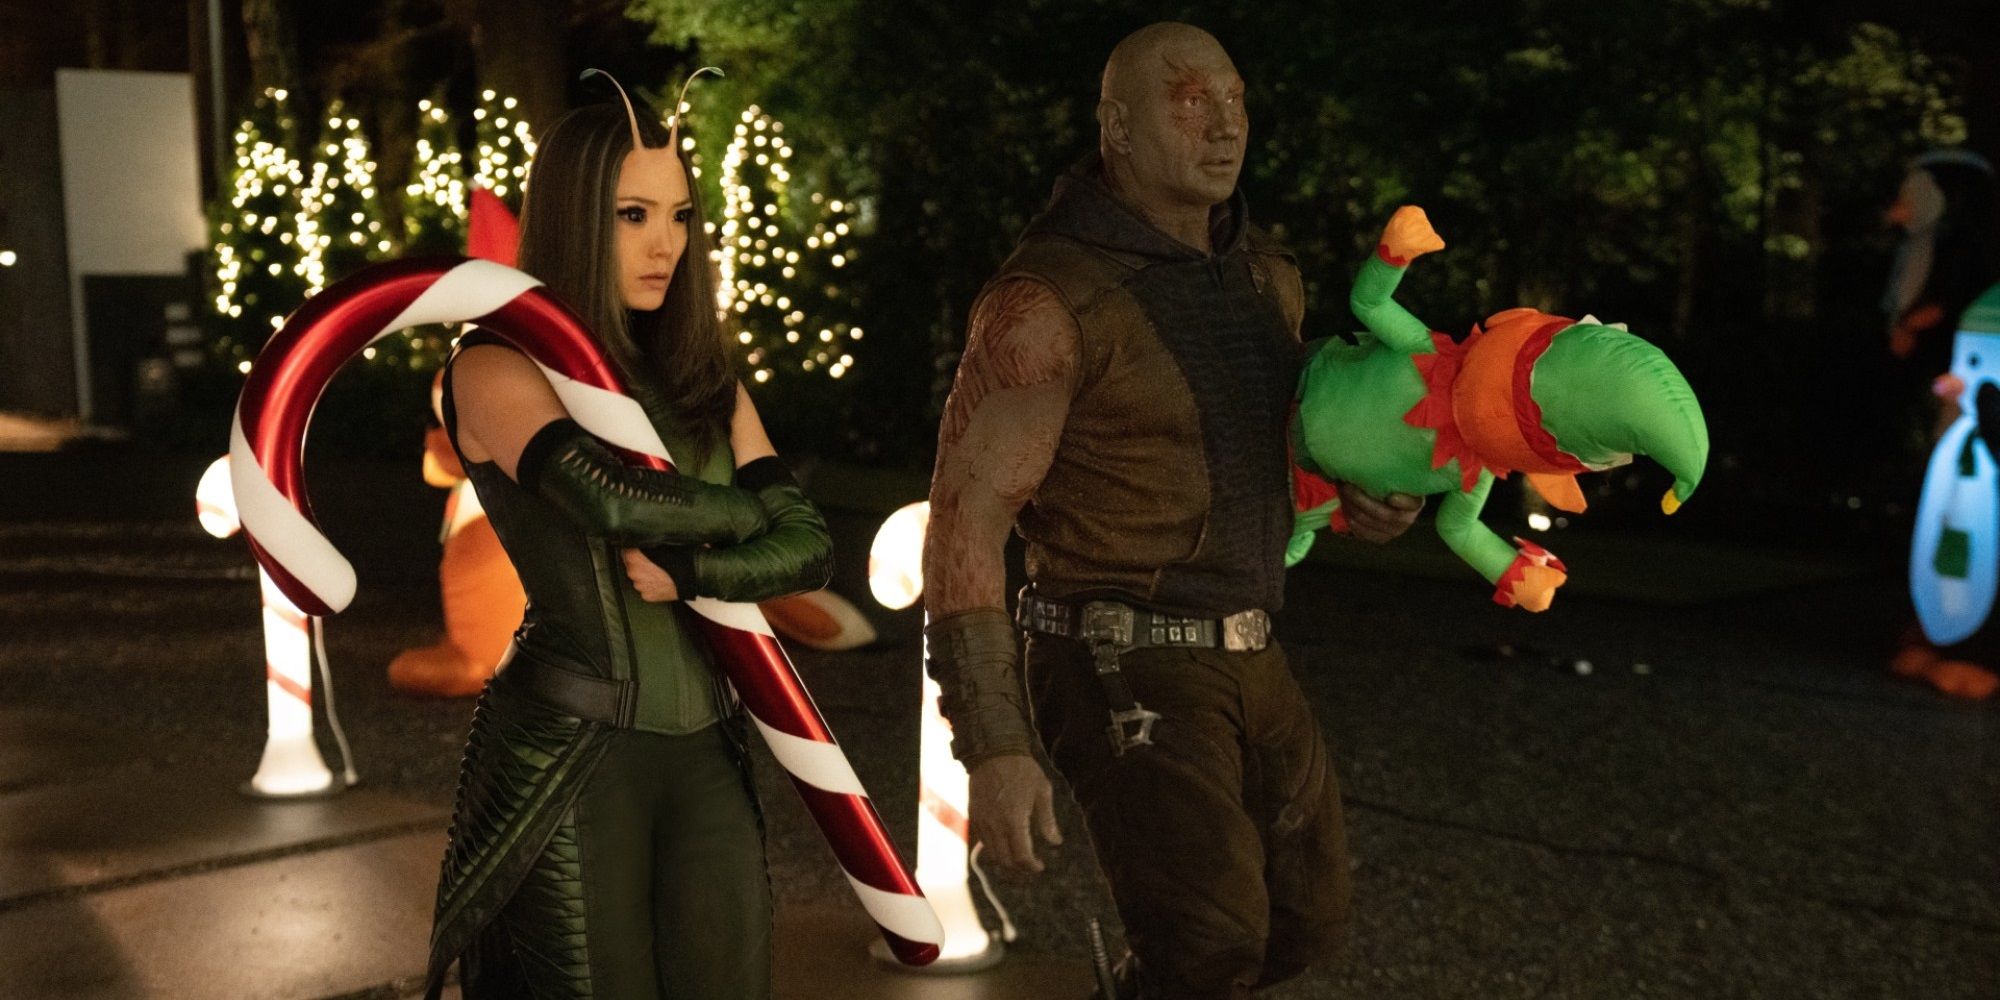 Drax_and_Mantis_at_Kevin_Bacon's_house_in_The_Guardians_of_the_Galaxy_Holiday_Special